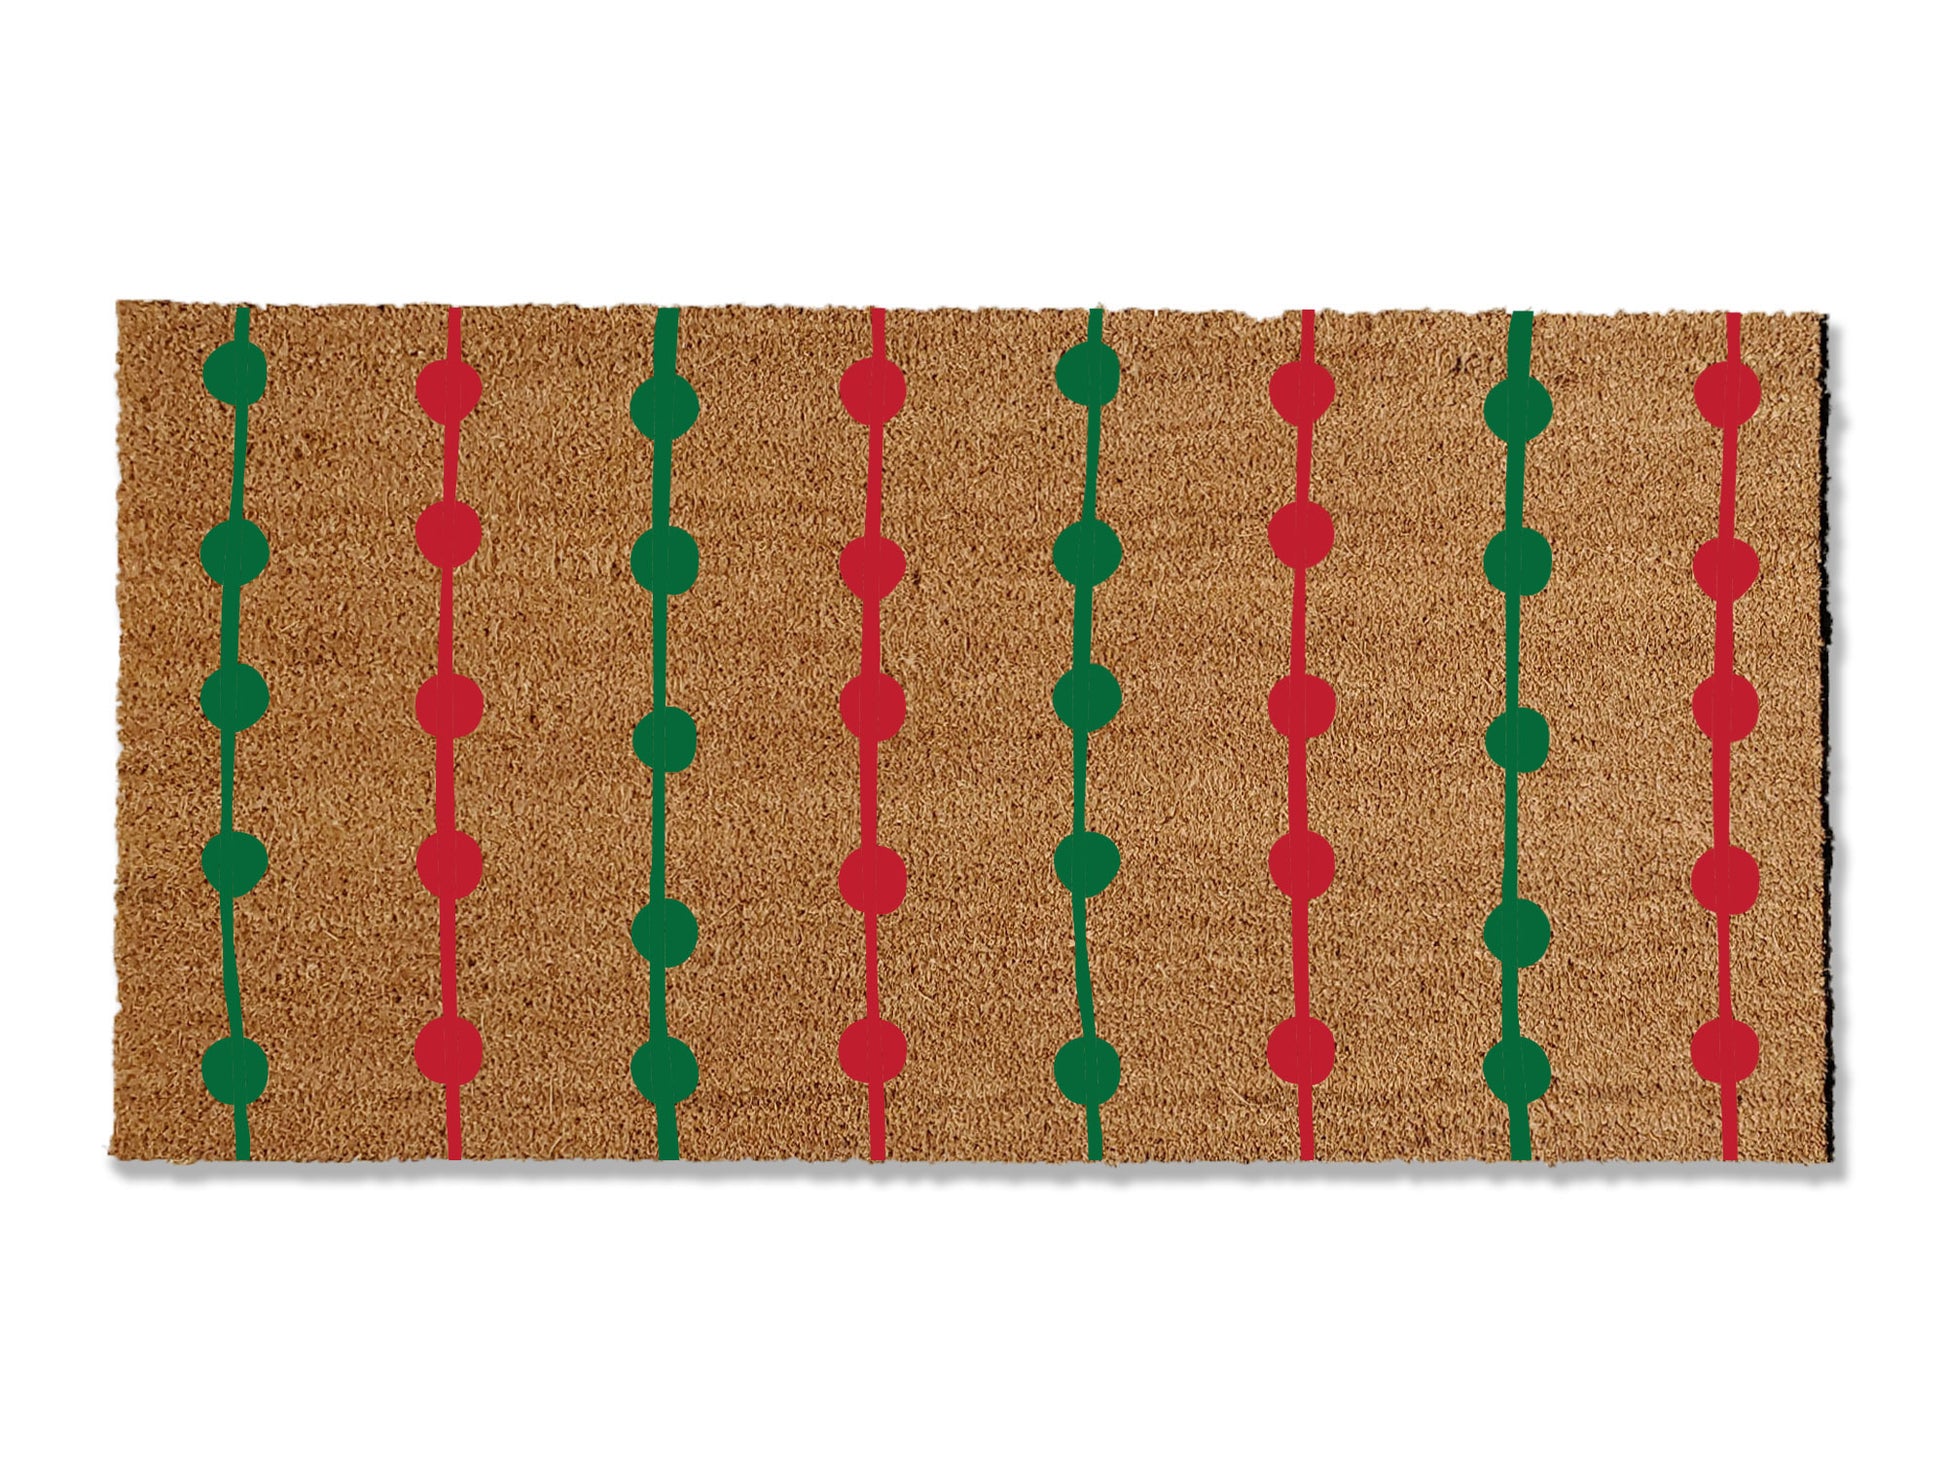 1/2 inch thick coir doormat adorned with festive strings of red and green Christmas lights. Perfect for elevating your entryway this holiday season, this decorative mat not only adds holidaycharm but is also highly effective at trapping dirt, ensuring a festive and tidy welcome."